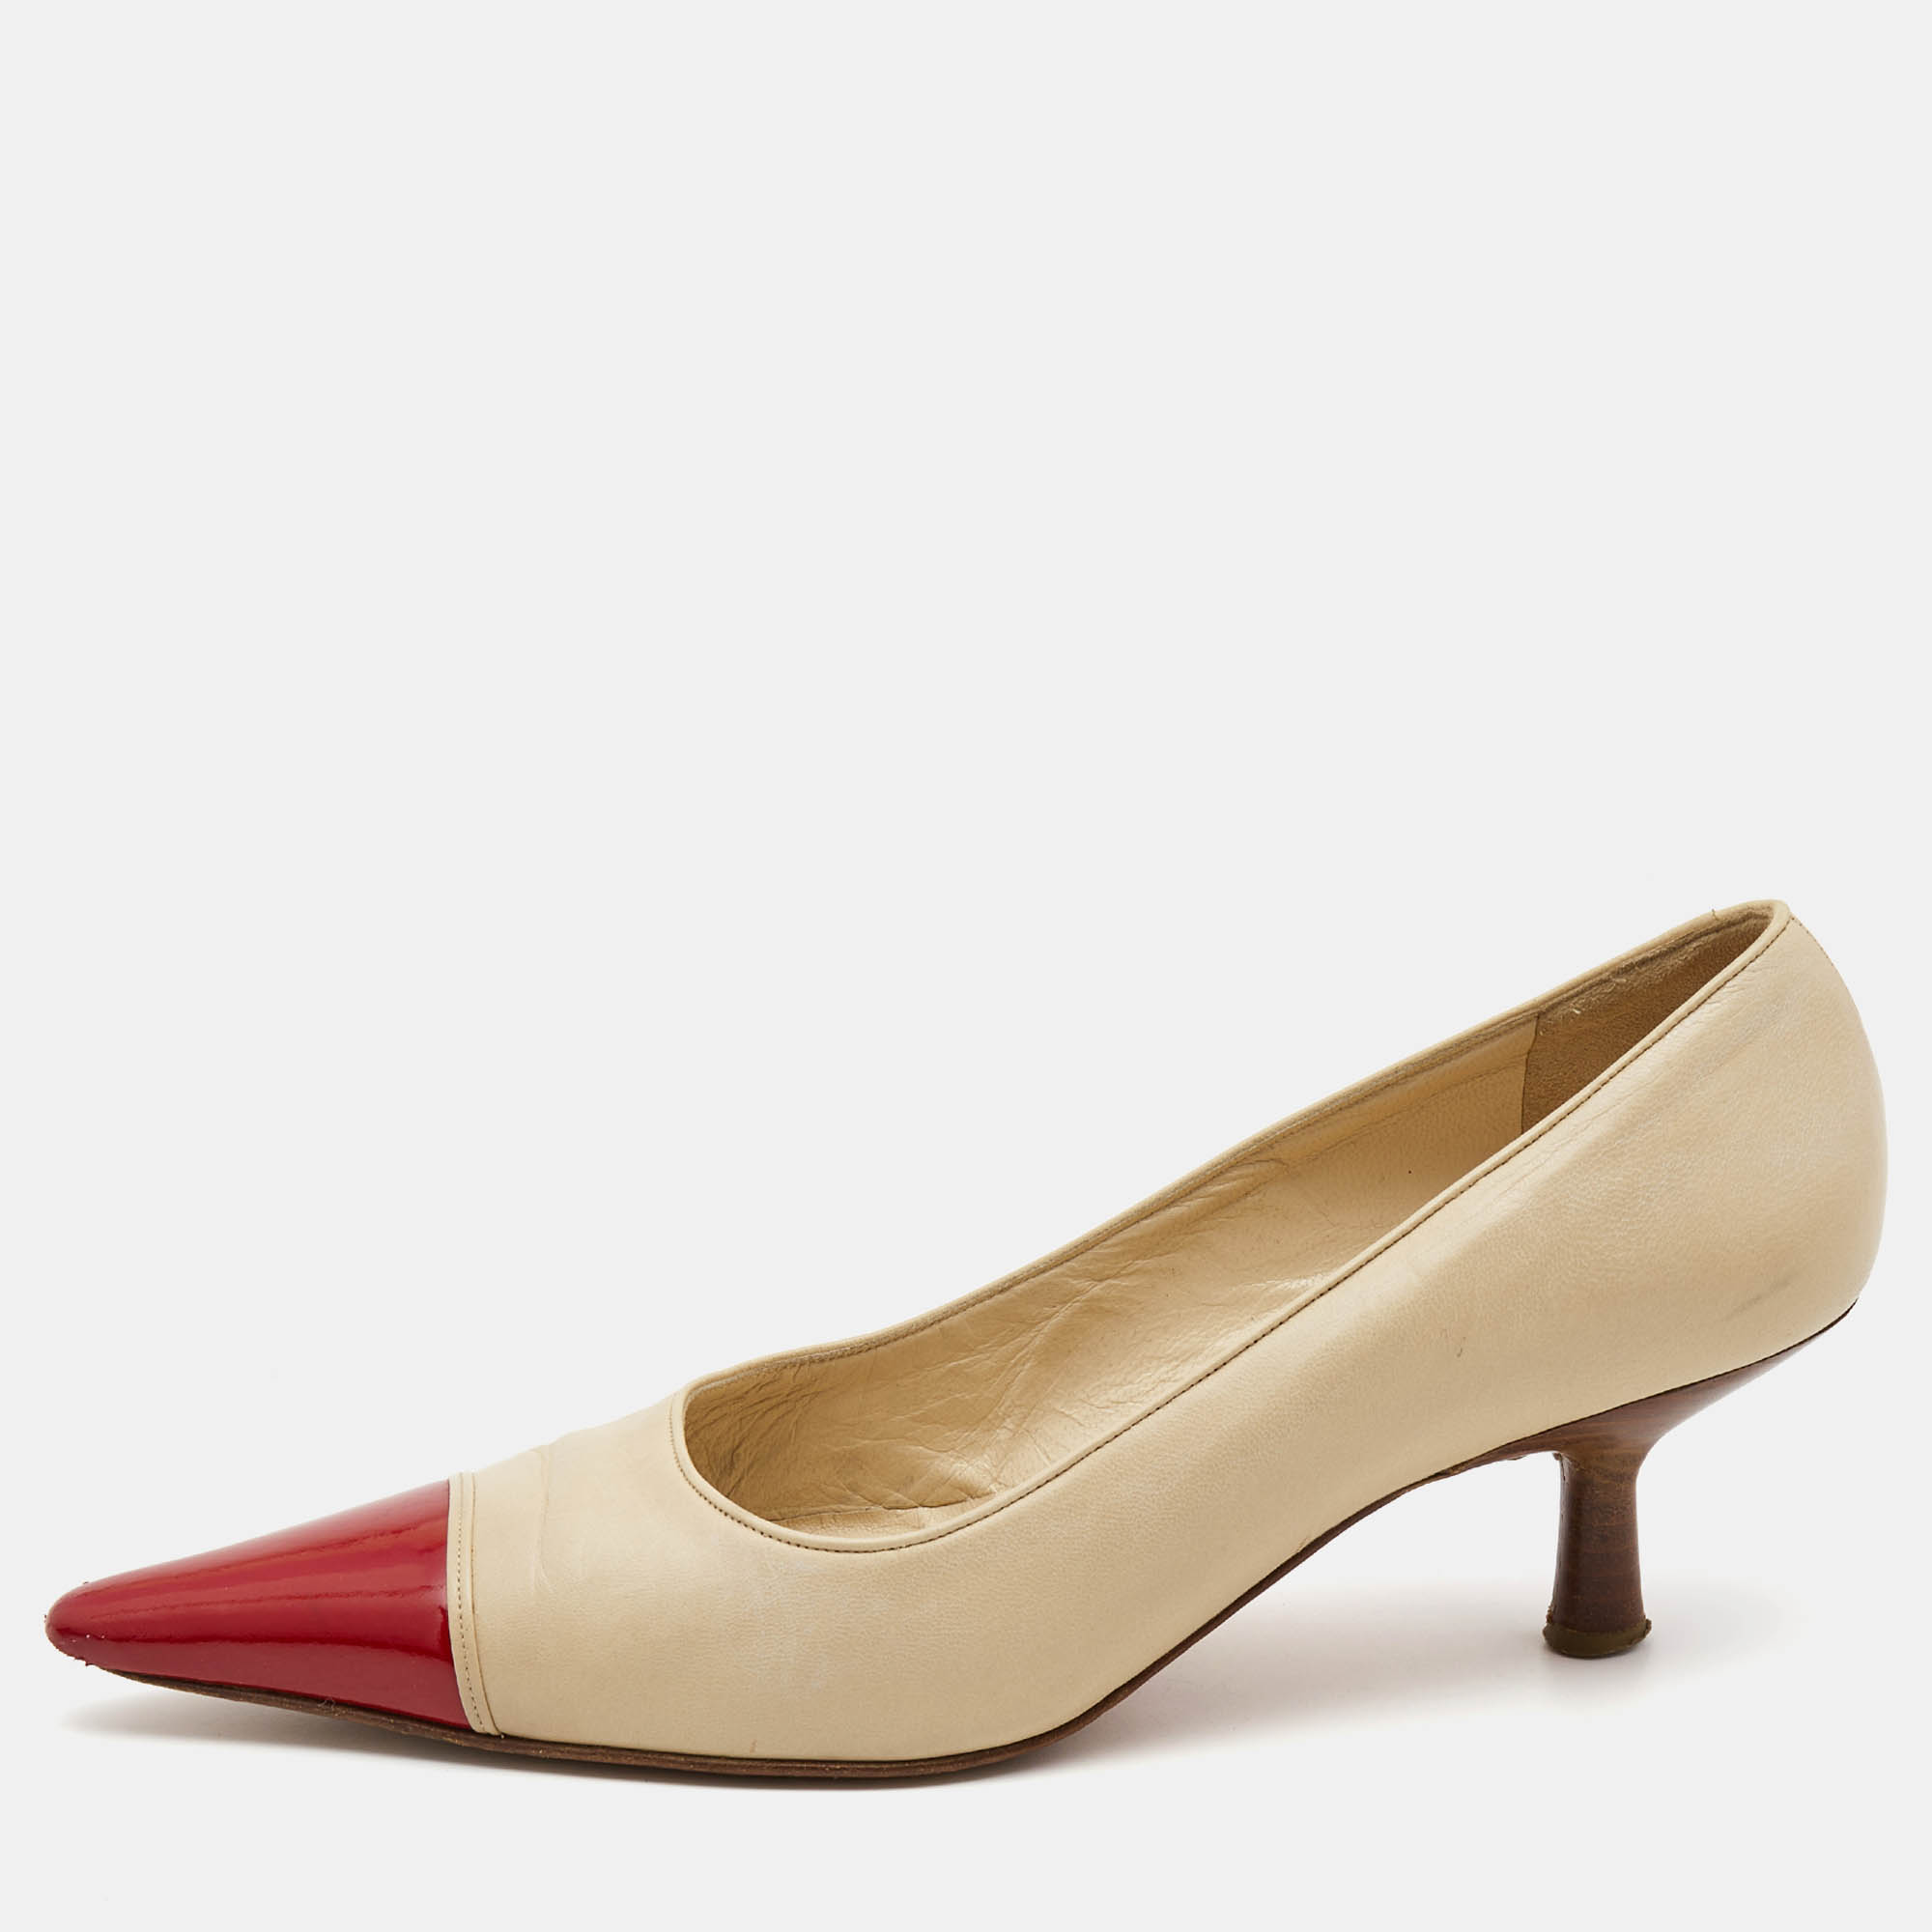 Chanel Beige/Red Patent And Leather Pointed Toe Pumps Size  38.5